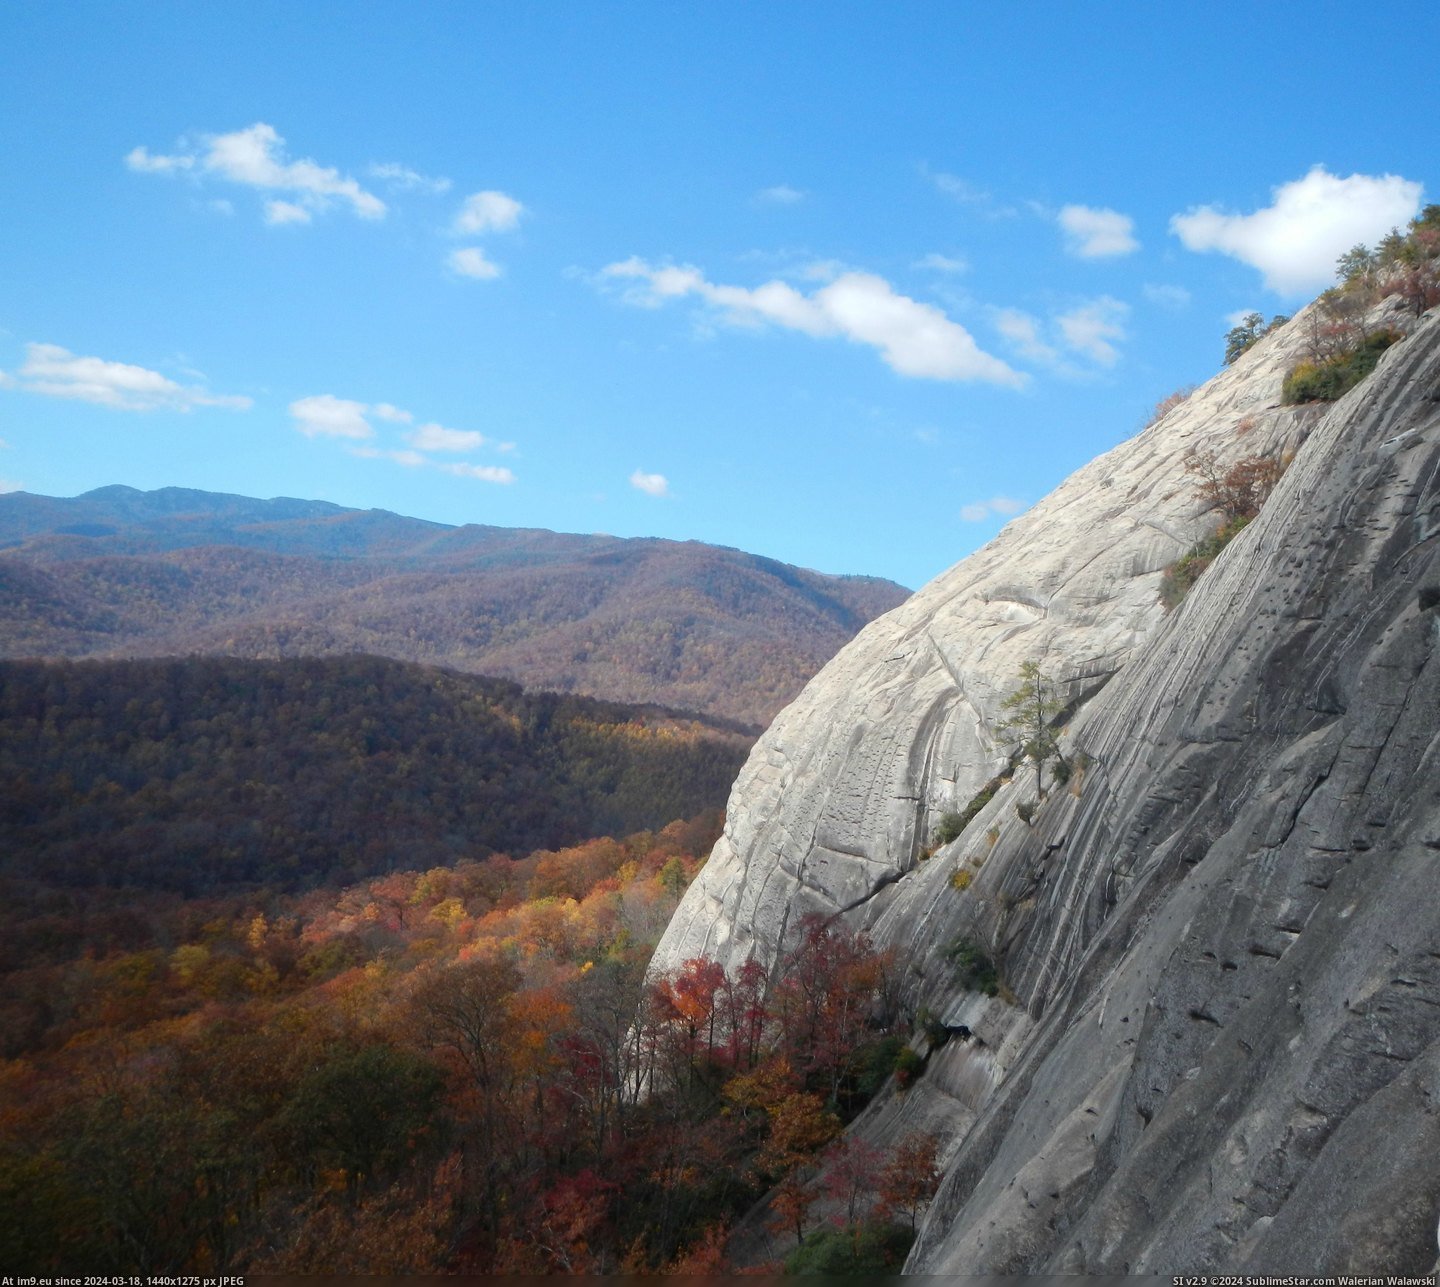 #National #Forest #Route #Climbing #Pisgah #Rock #Glass [Earthporn] From a climbing route on Looking Glass Rock: Pisgah National Forest, NC [OC] [2910x2588] Pic. (Изображение из альбом My r/EARTHPORN favs))